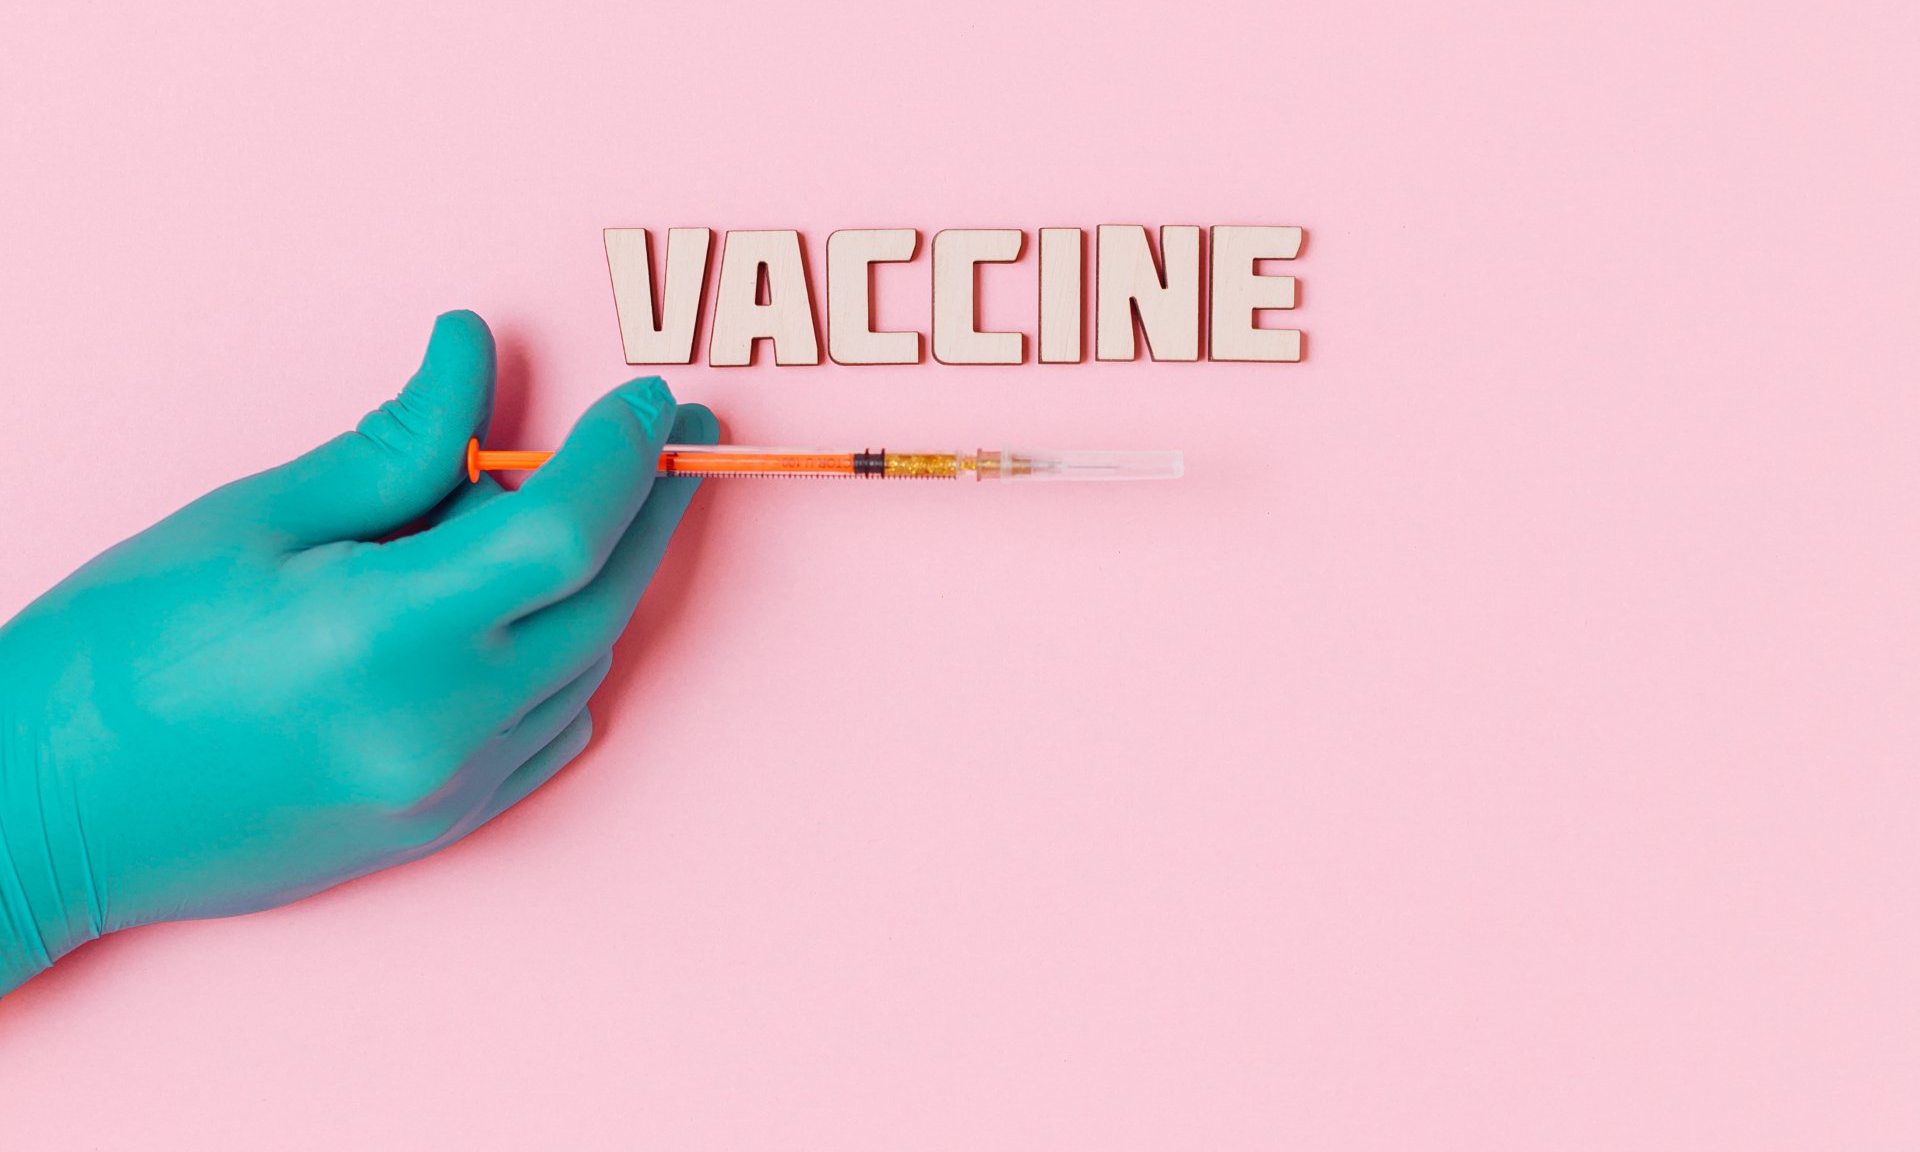 Sleeves up? The status of Covid19 vaccine mandates in the workplace